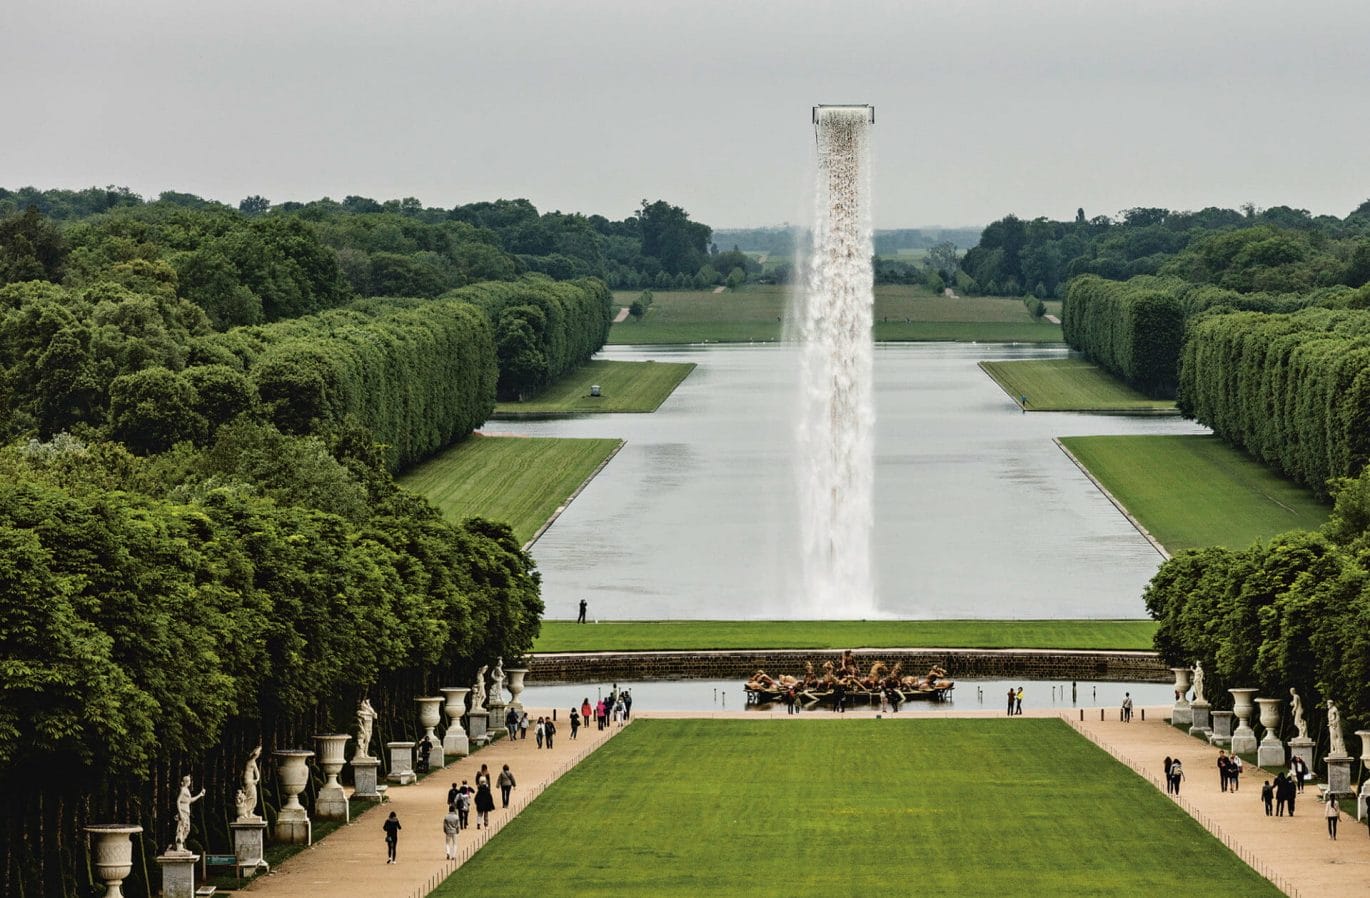 “Waterfall” (2016), crane tower, water, stainless steel, pump system, hoses, ballast, 42.5 x 6 x 5 meters, installation views at Palace of Versailles. Photo by Anders Sune Berg